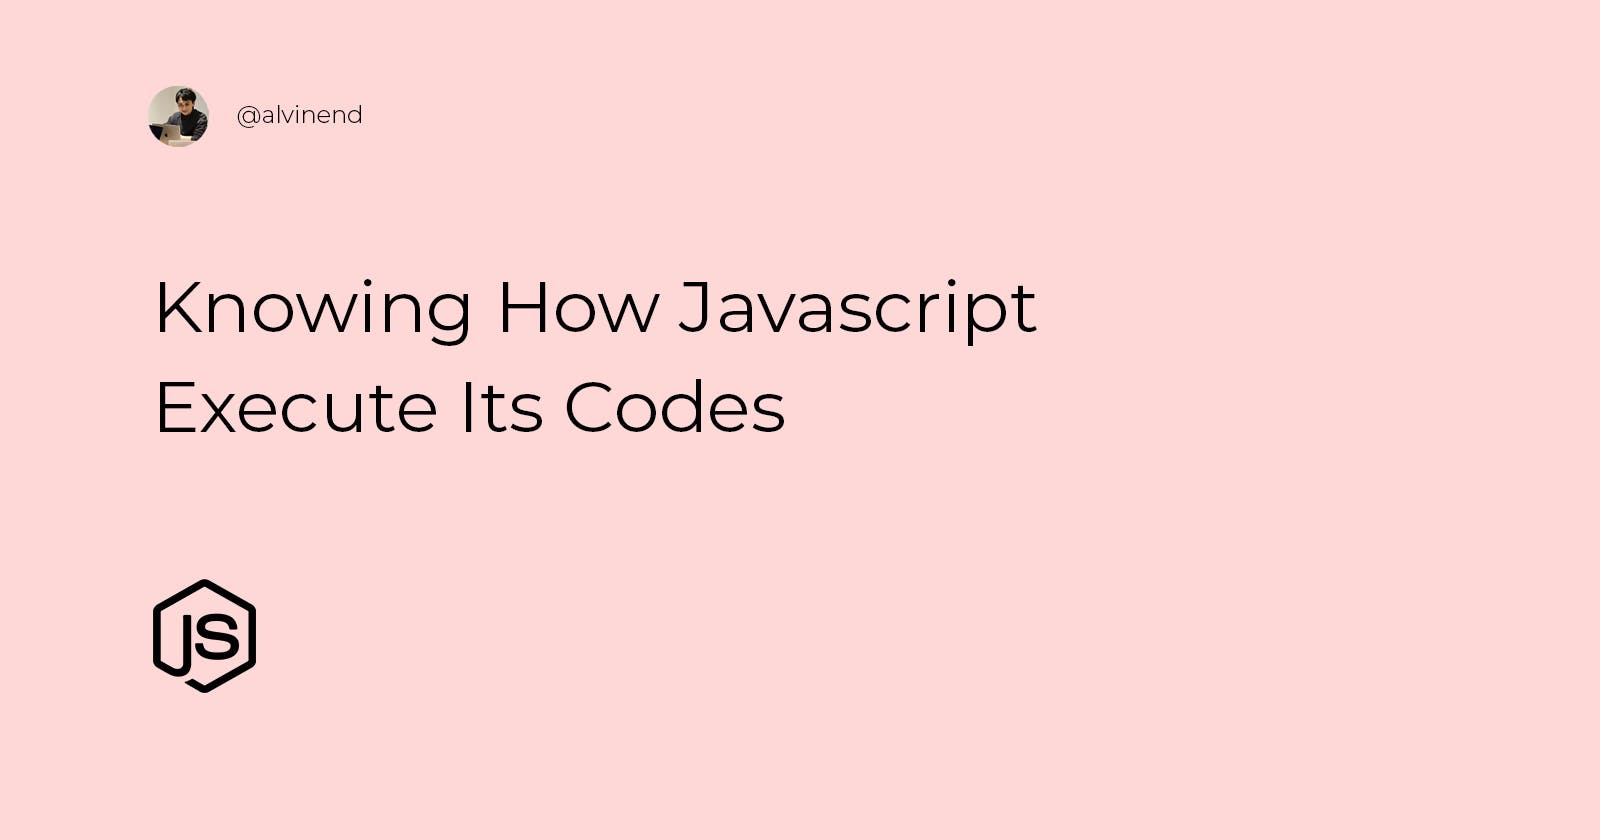 Knowing How Javascript Execute Its Codes